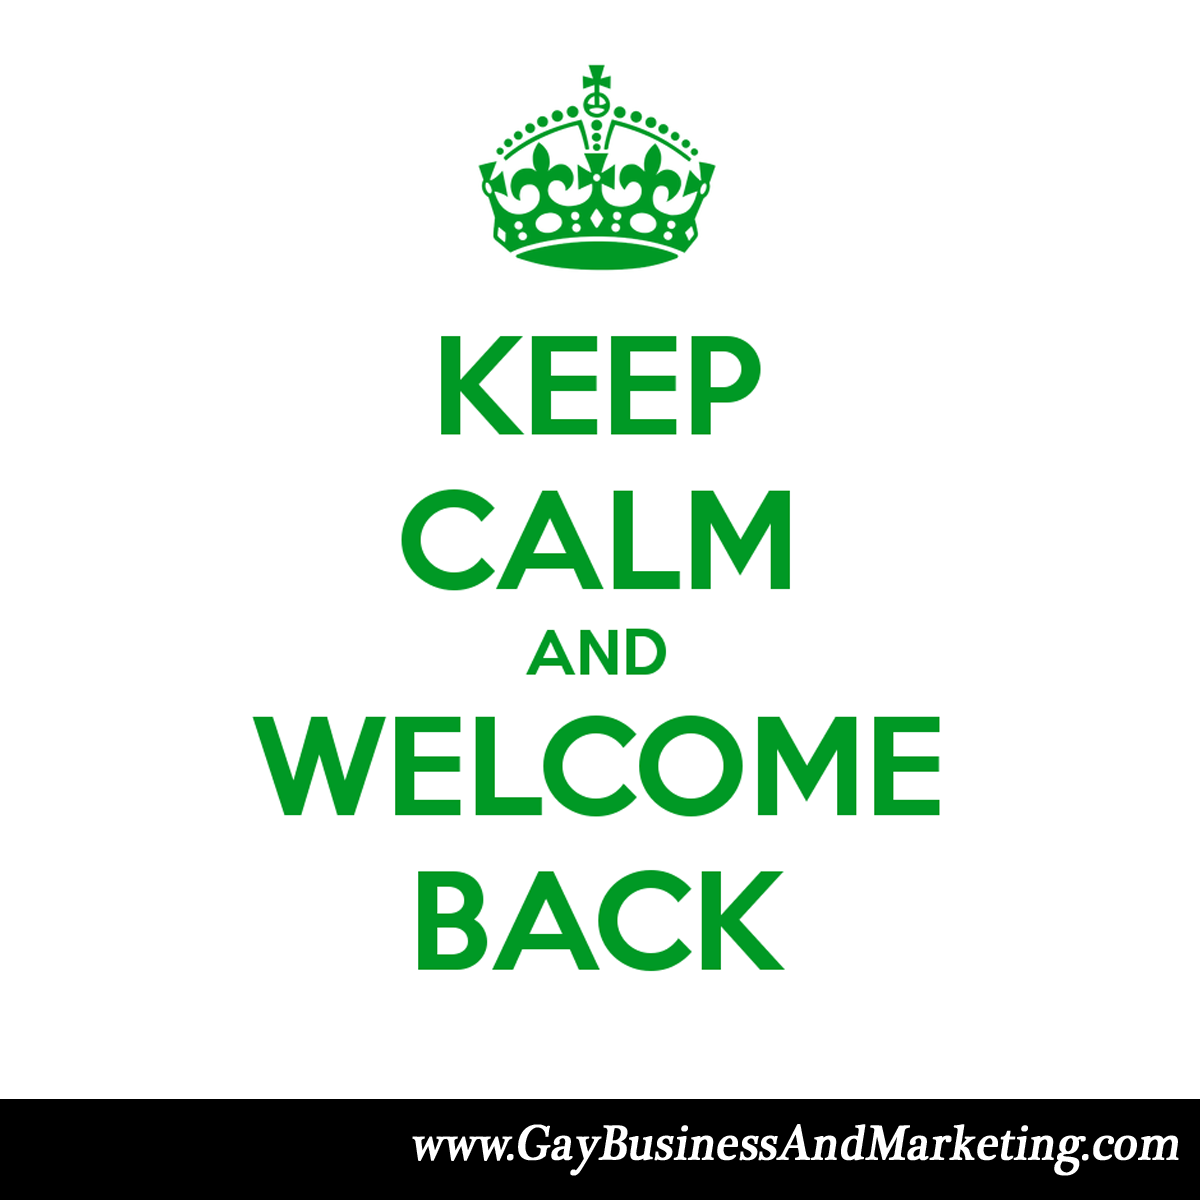 Welcome back!